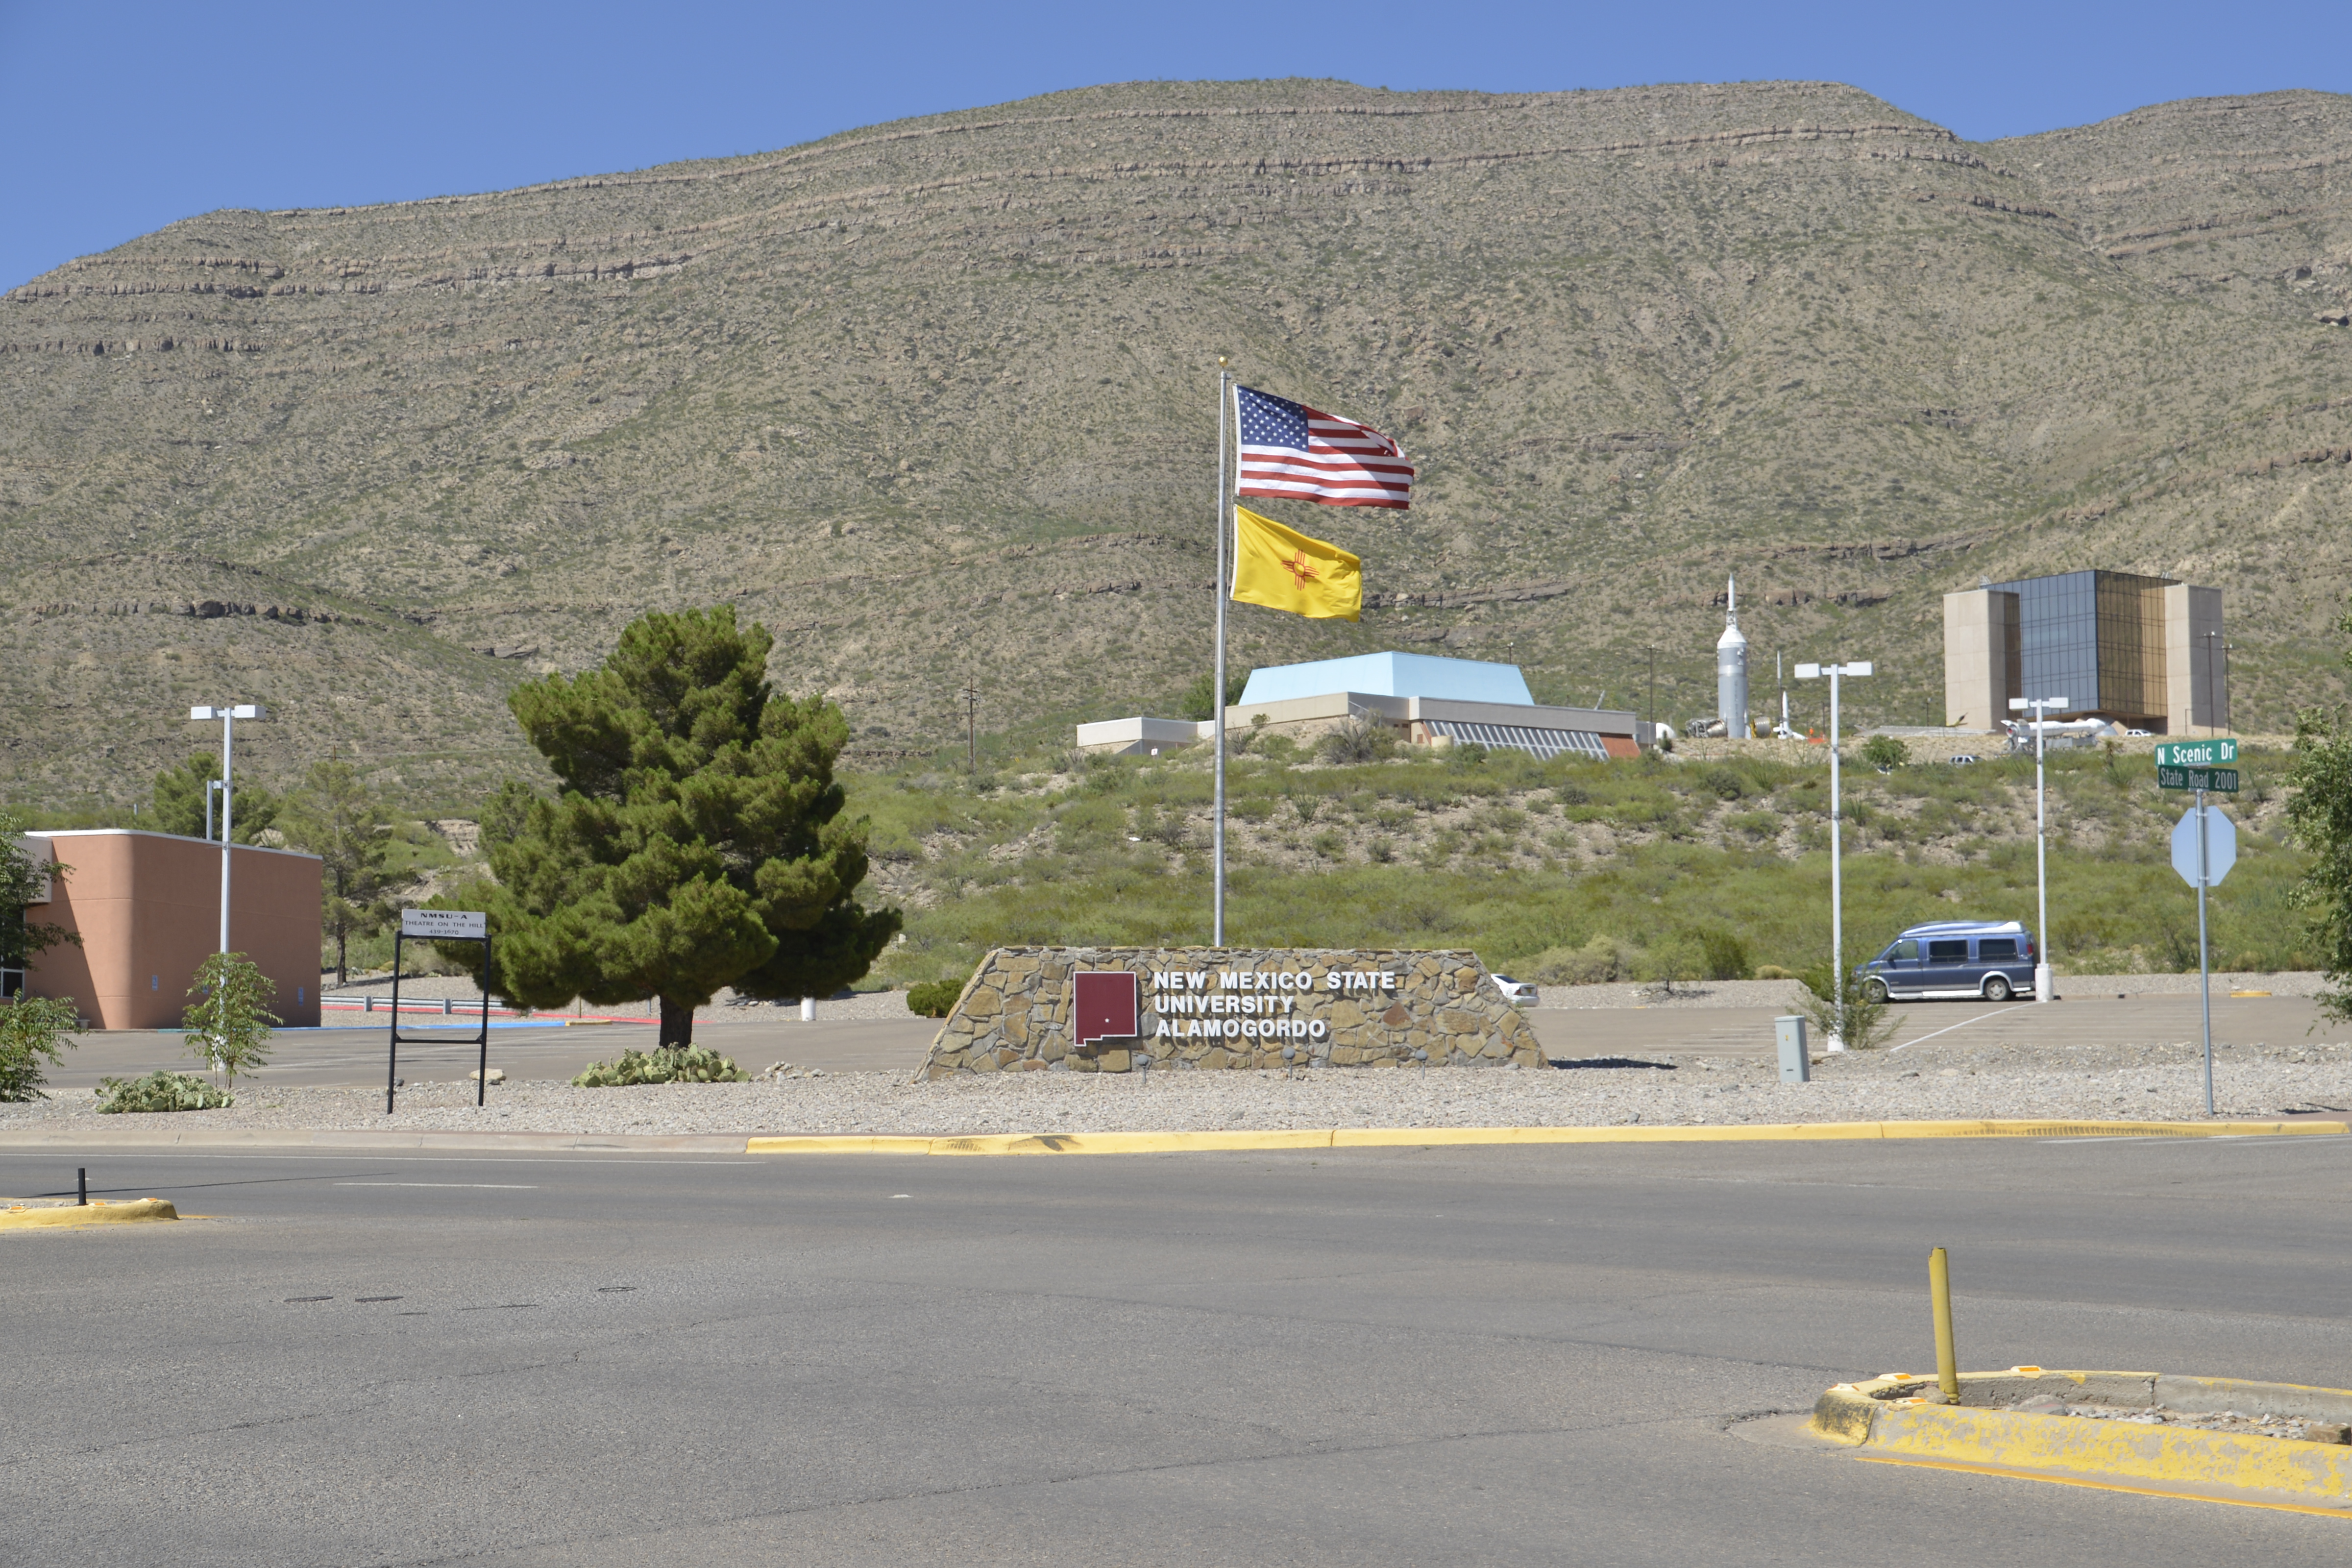 NMSU-A sign with Flags